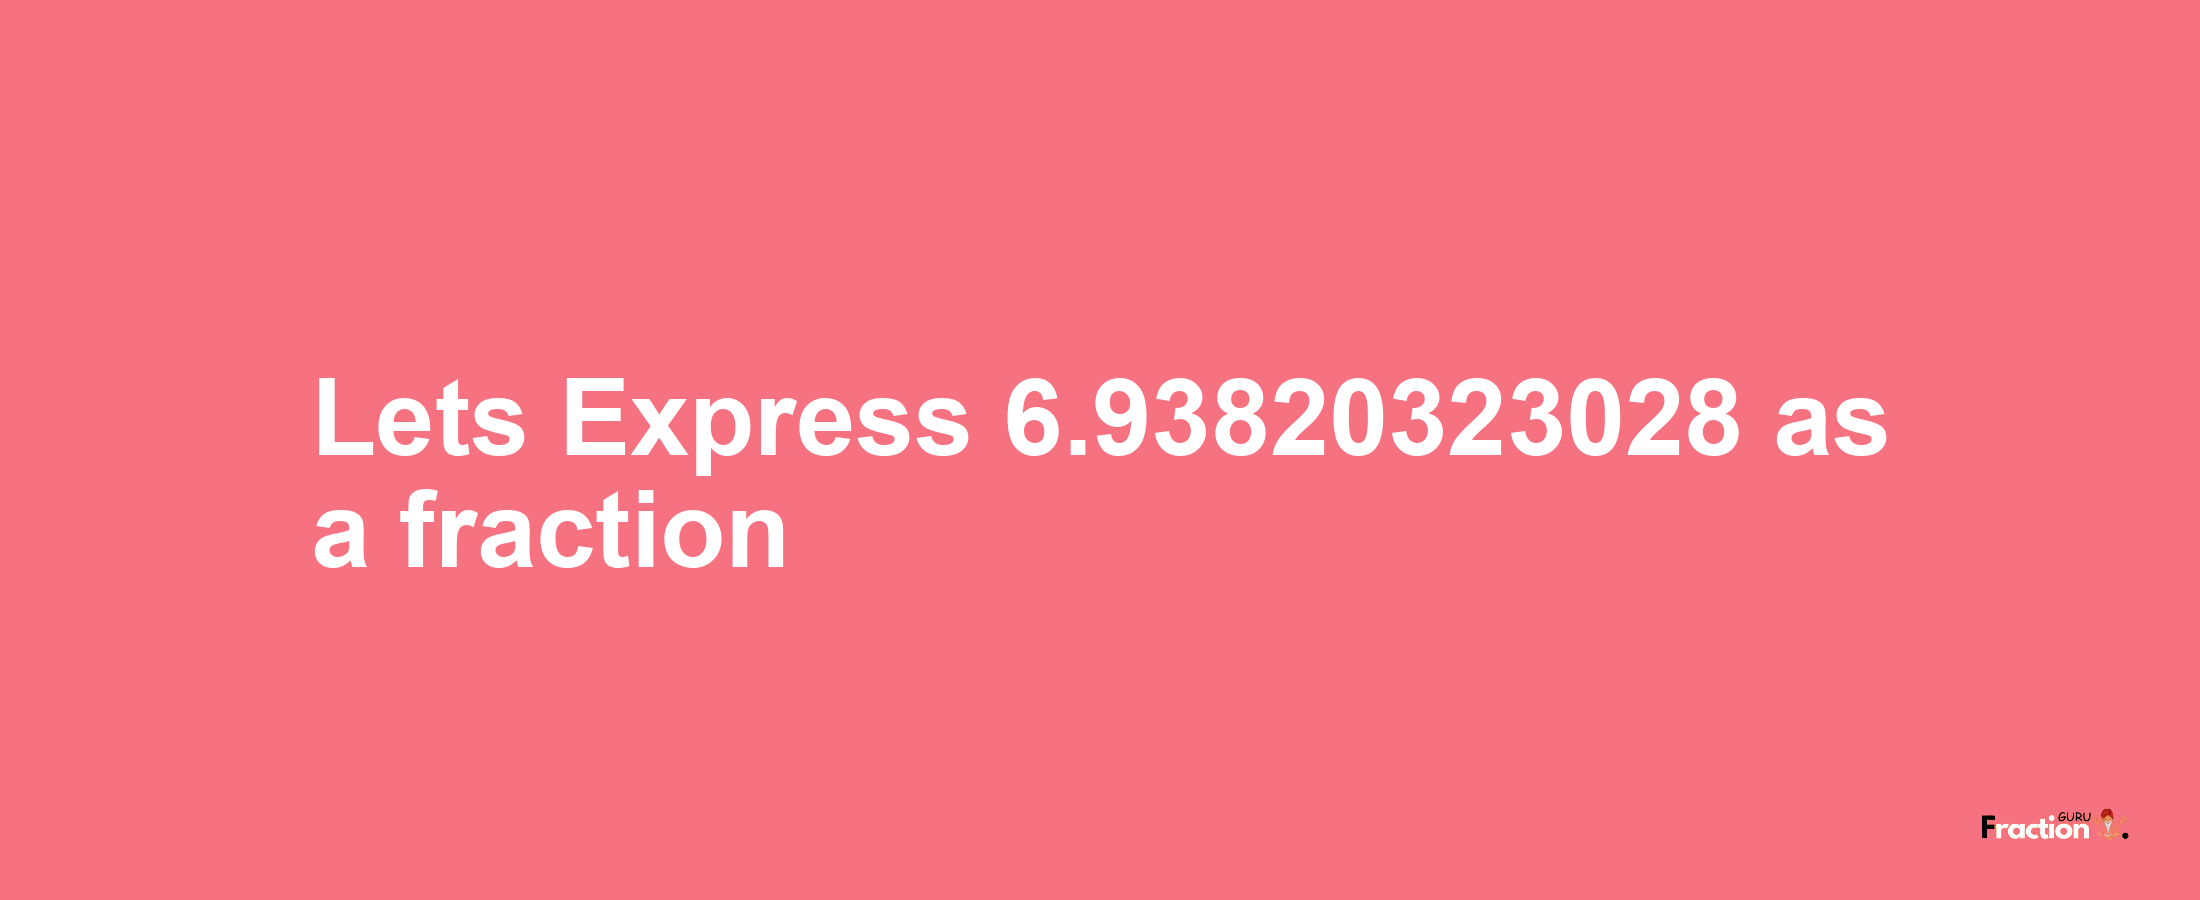 Lets Express 6.93820323028 as afraction